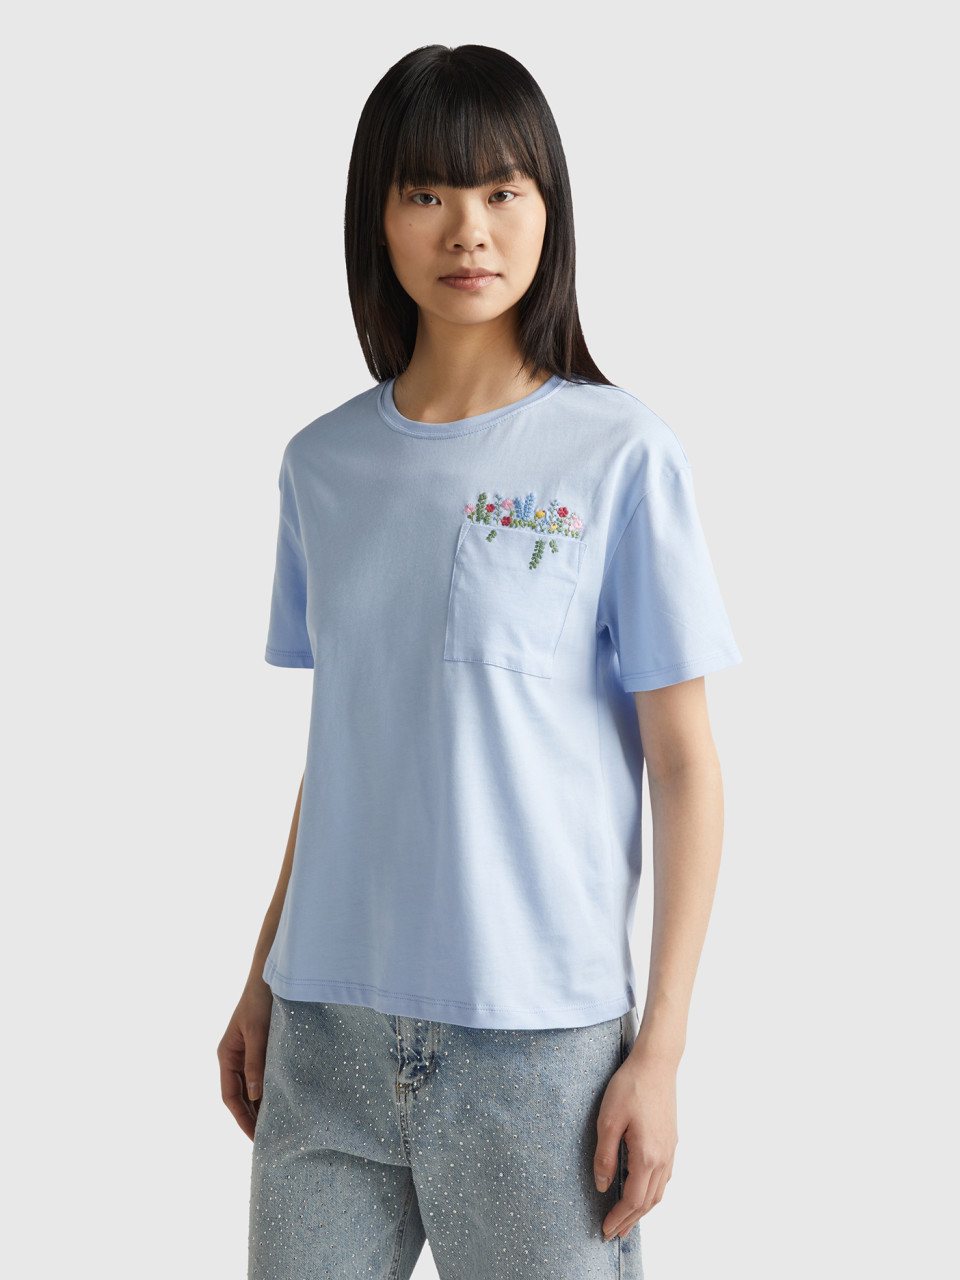 Benetton, T-shirt With Pocket And Embroidery, Sky Blue, Women